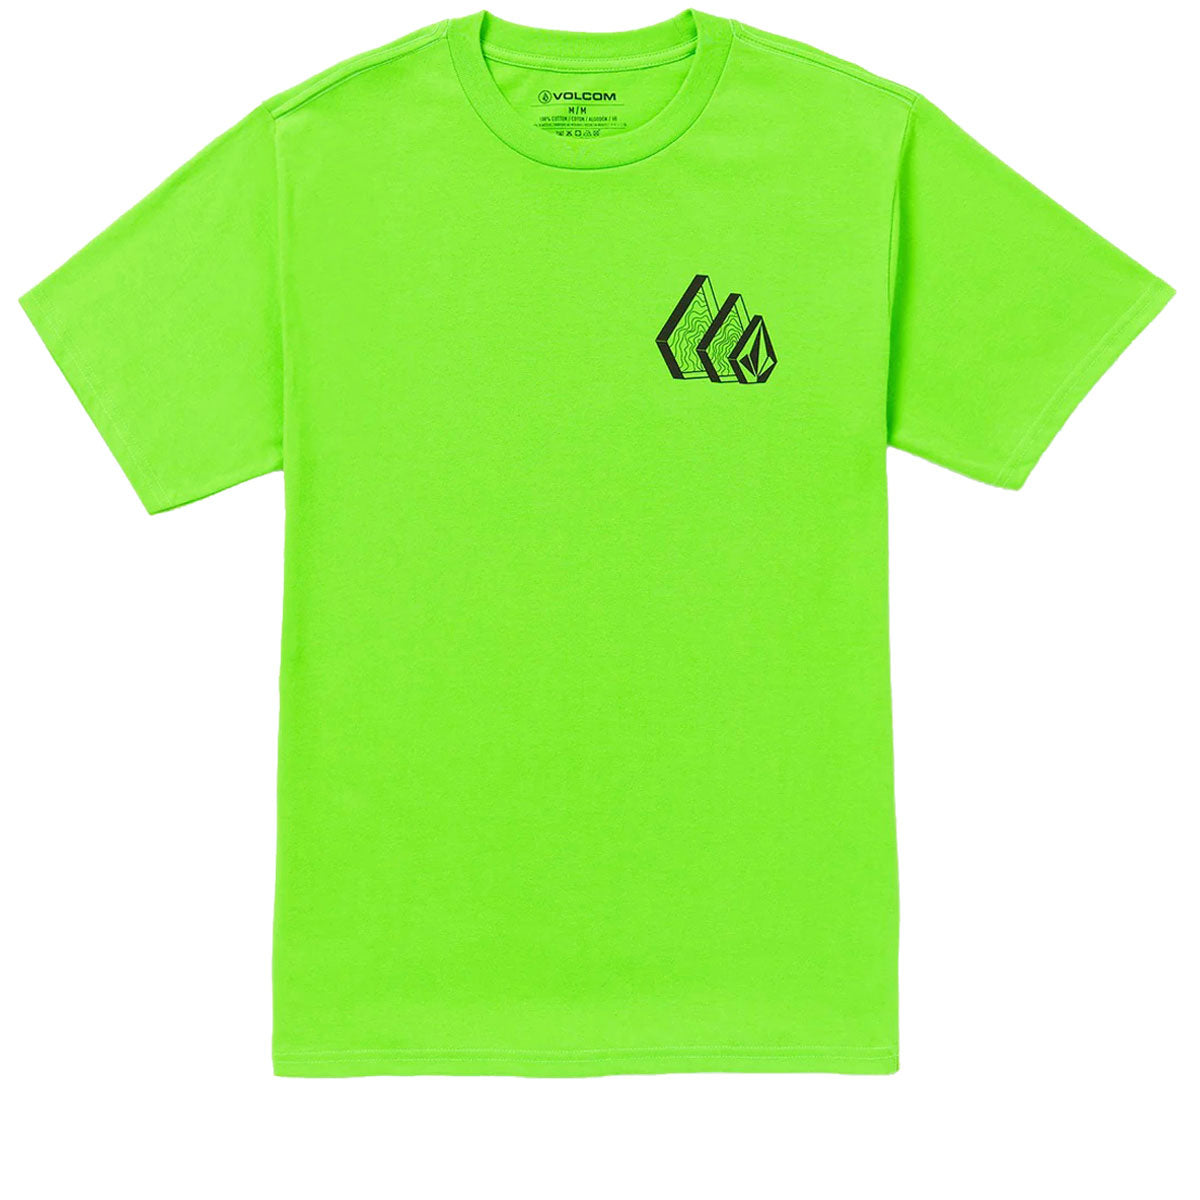 Volcom Repeater T-Shirt - Electric Green image 1